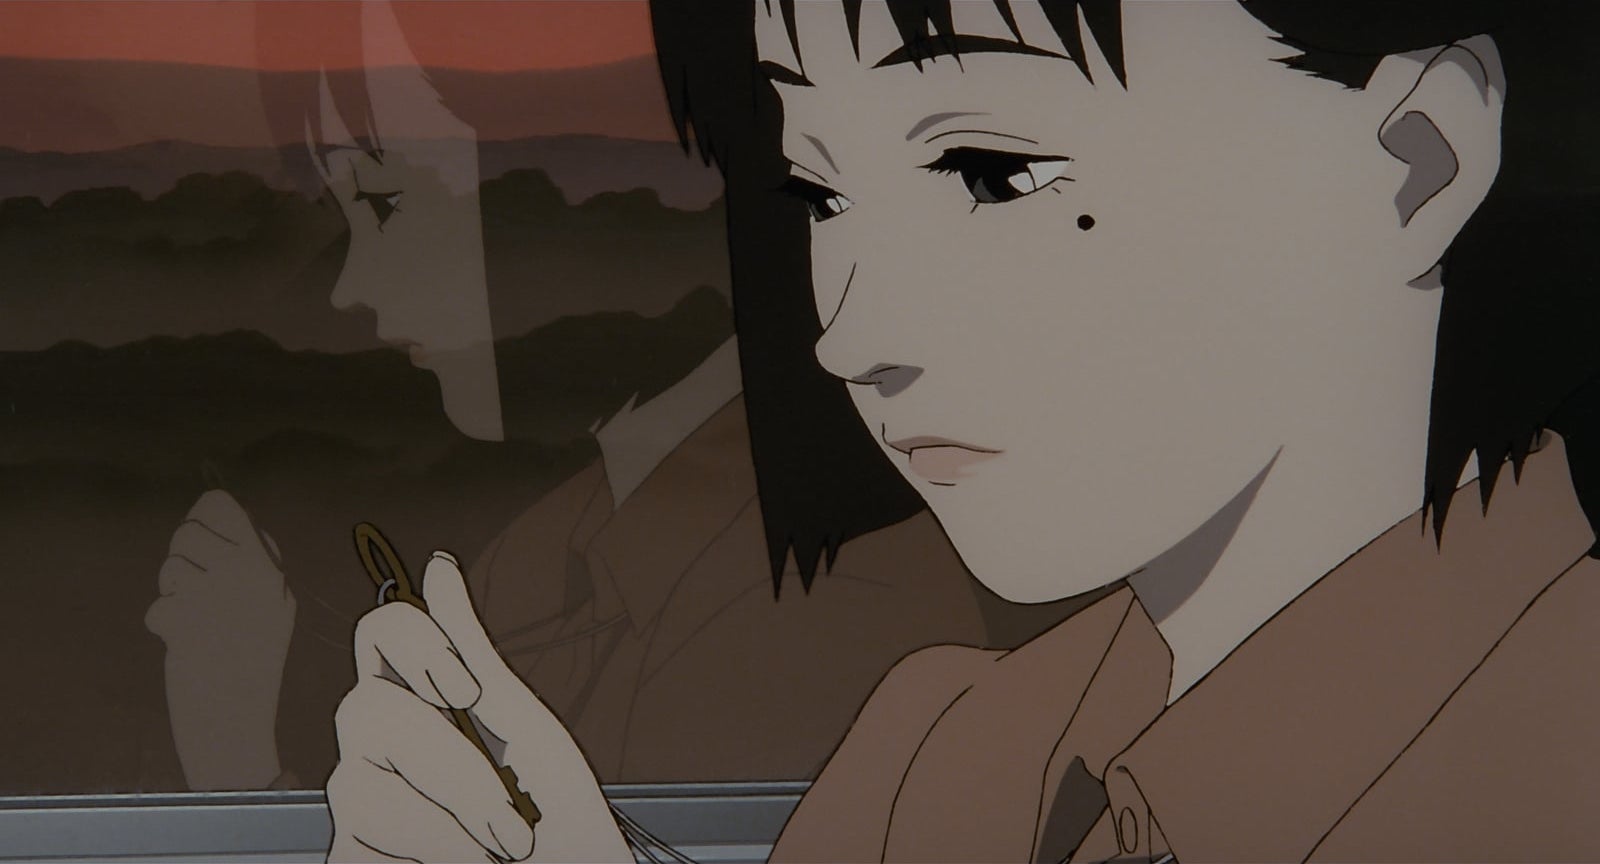 A young Chiyoko looking wistfully at a key in her hand.